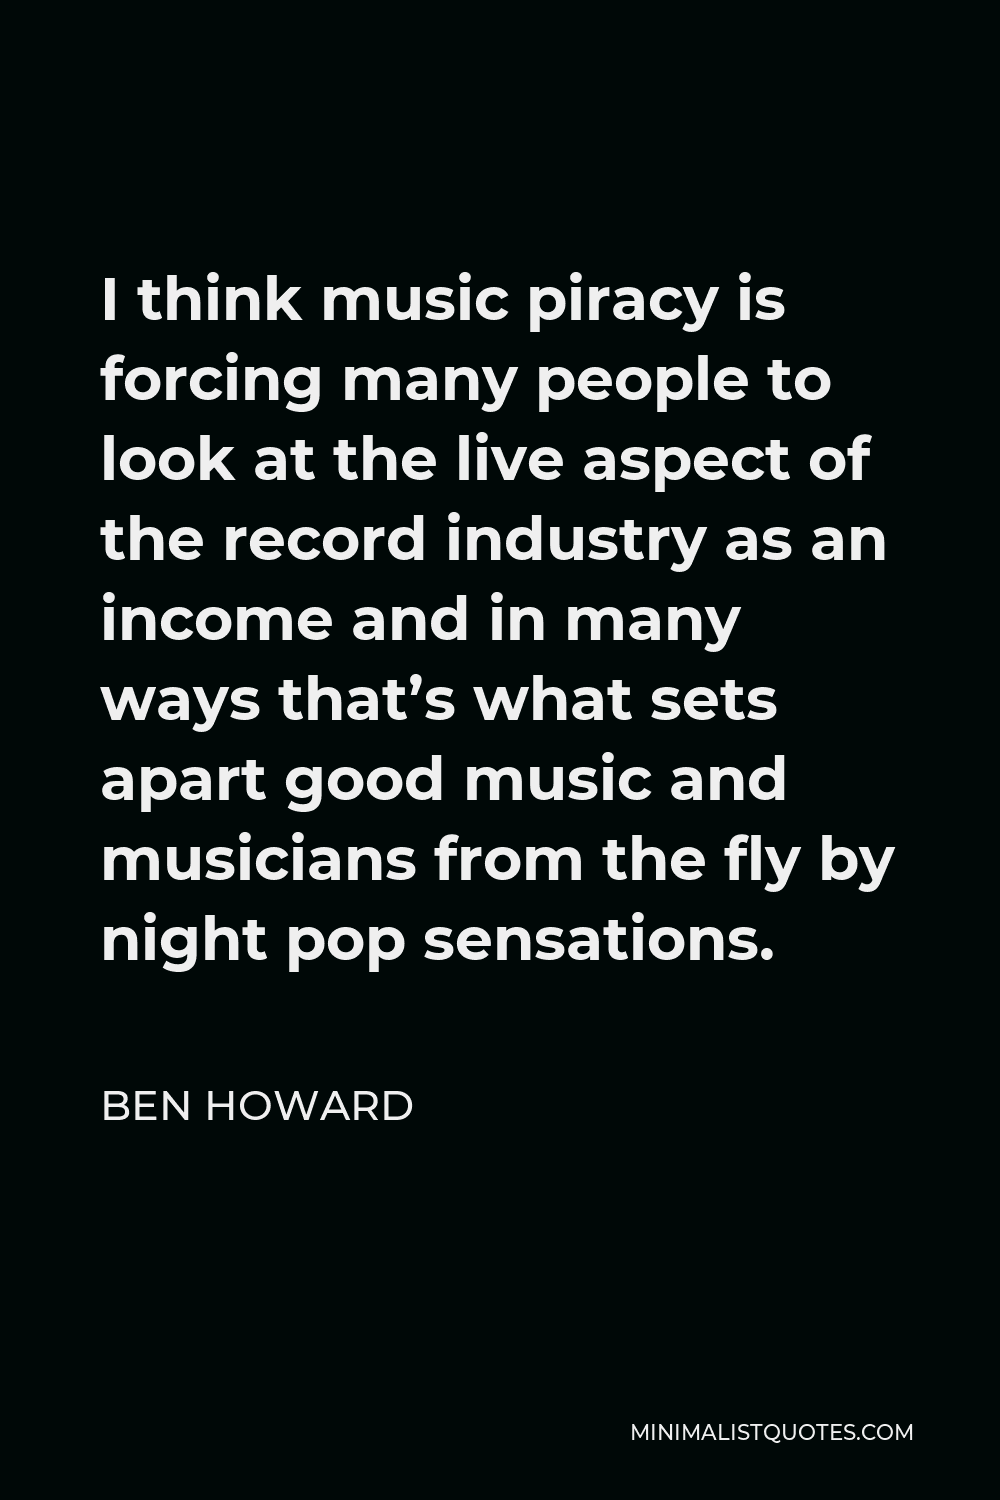 Ben Howard Quote - I think music piracy is forcing many people to look at the live aspect of the record industry as an income and in many ways that’s what sets apart good music and musicians from the fly by night pop sensations.